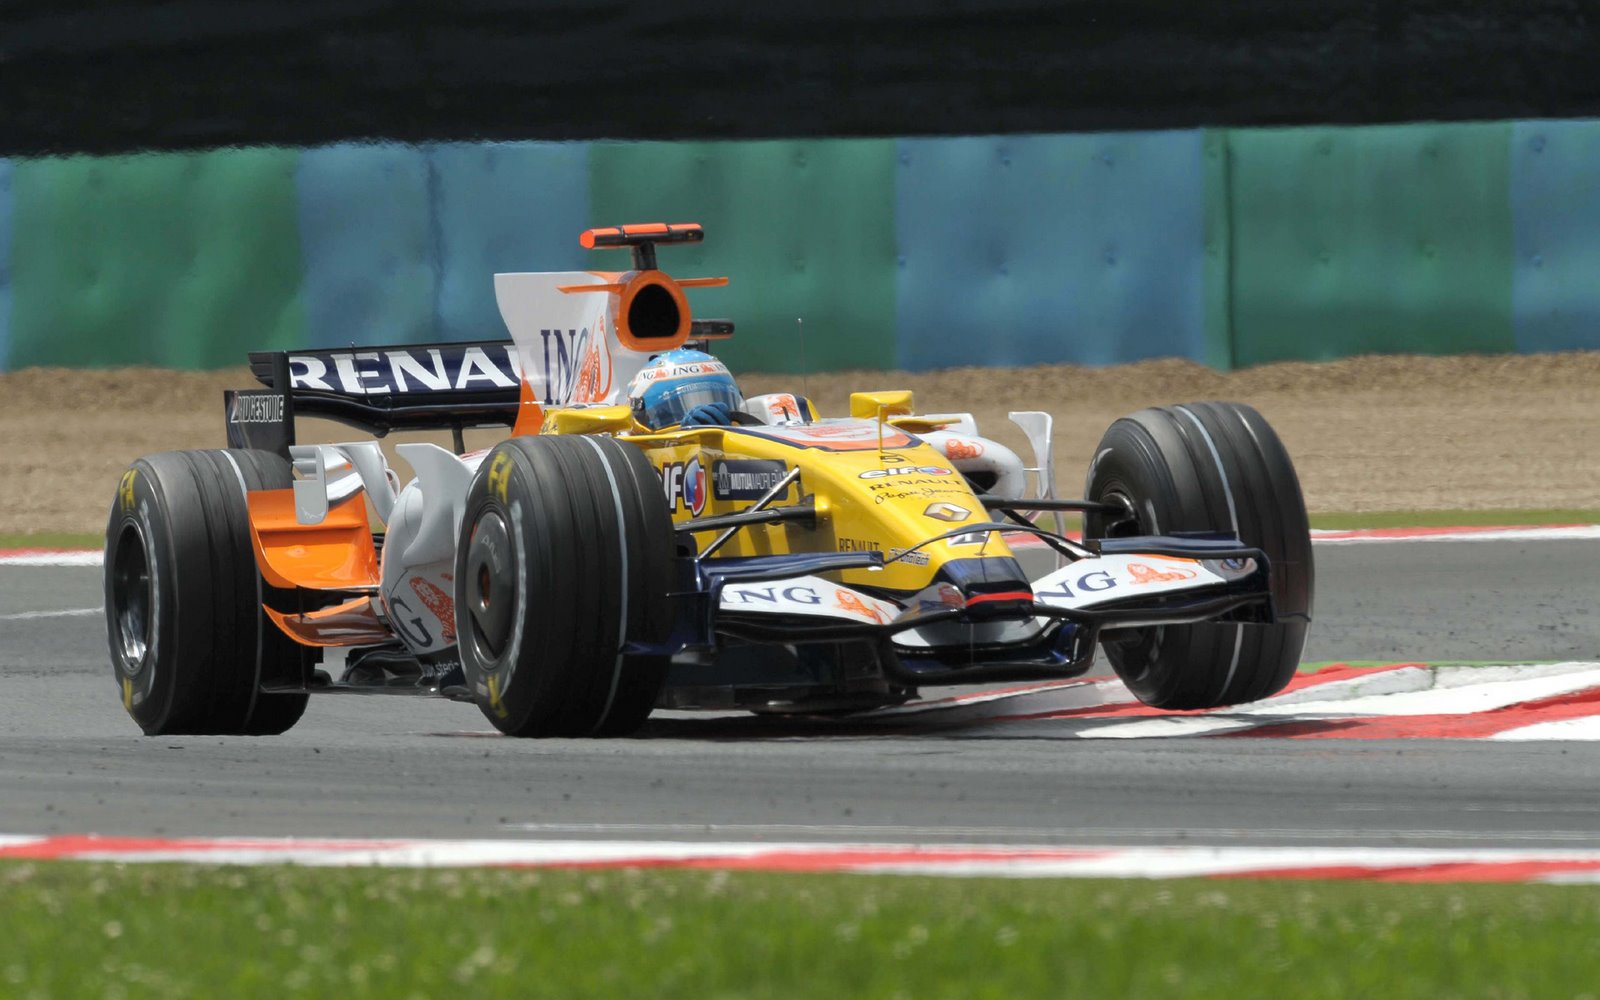 [Fernando+Alonso+Renault+Friday+Free+Practise+France+Magny+Cours+7.jpg]